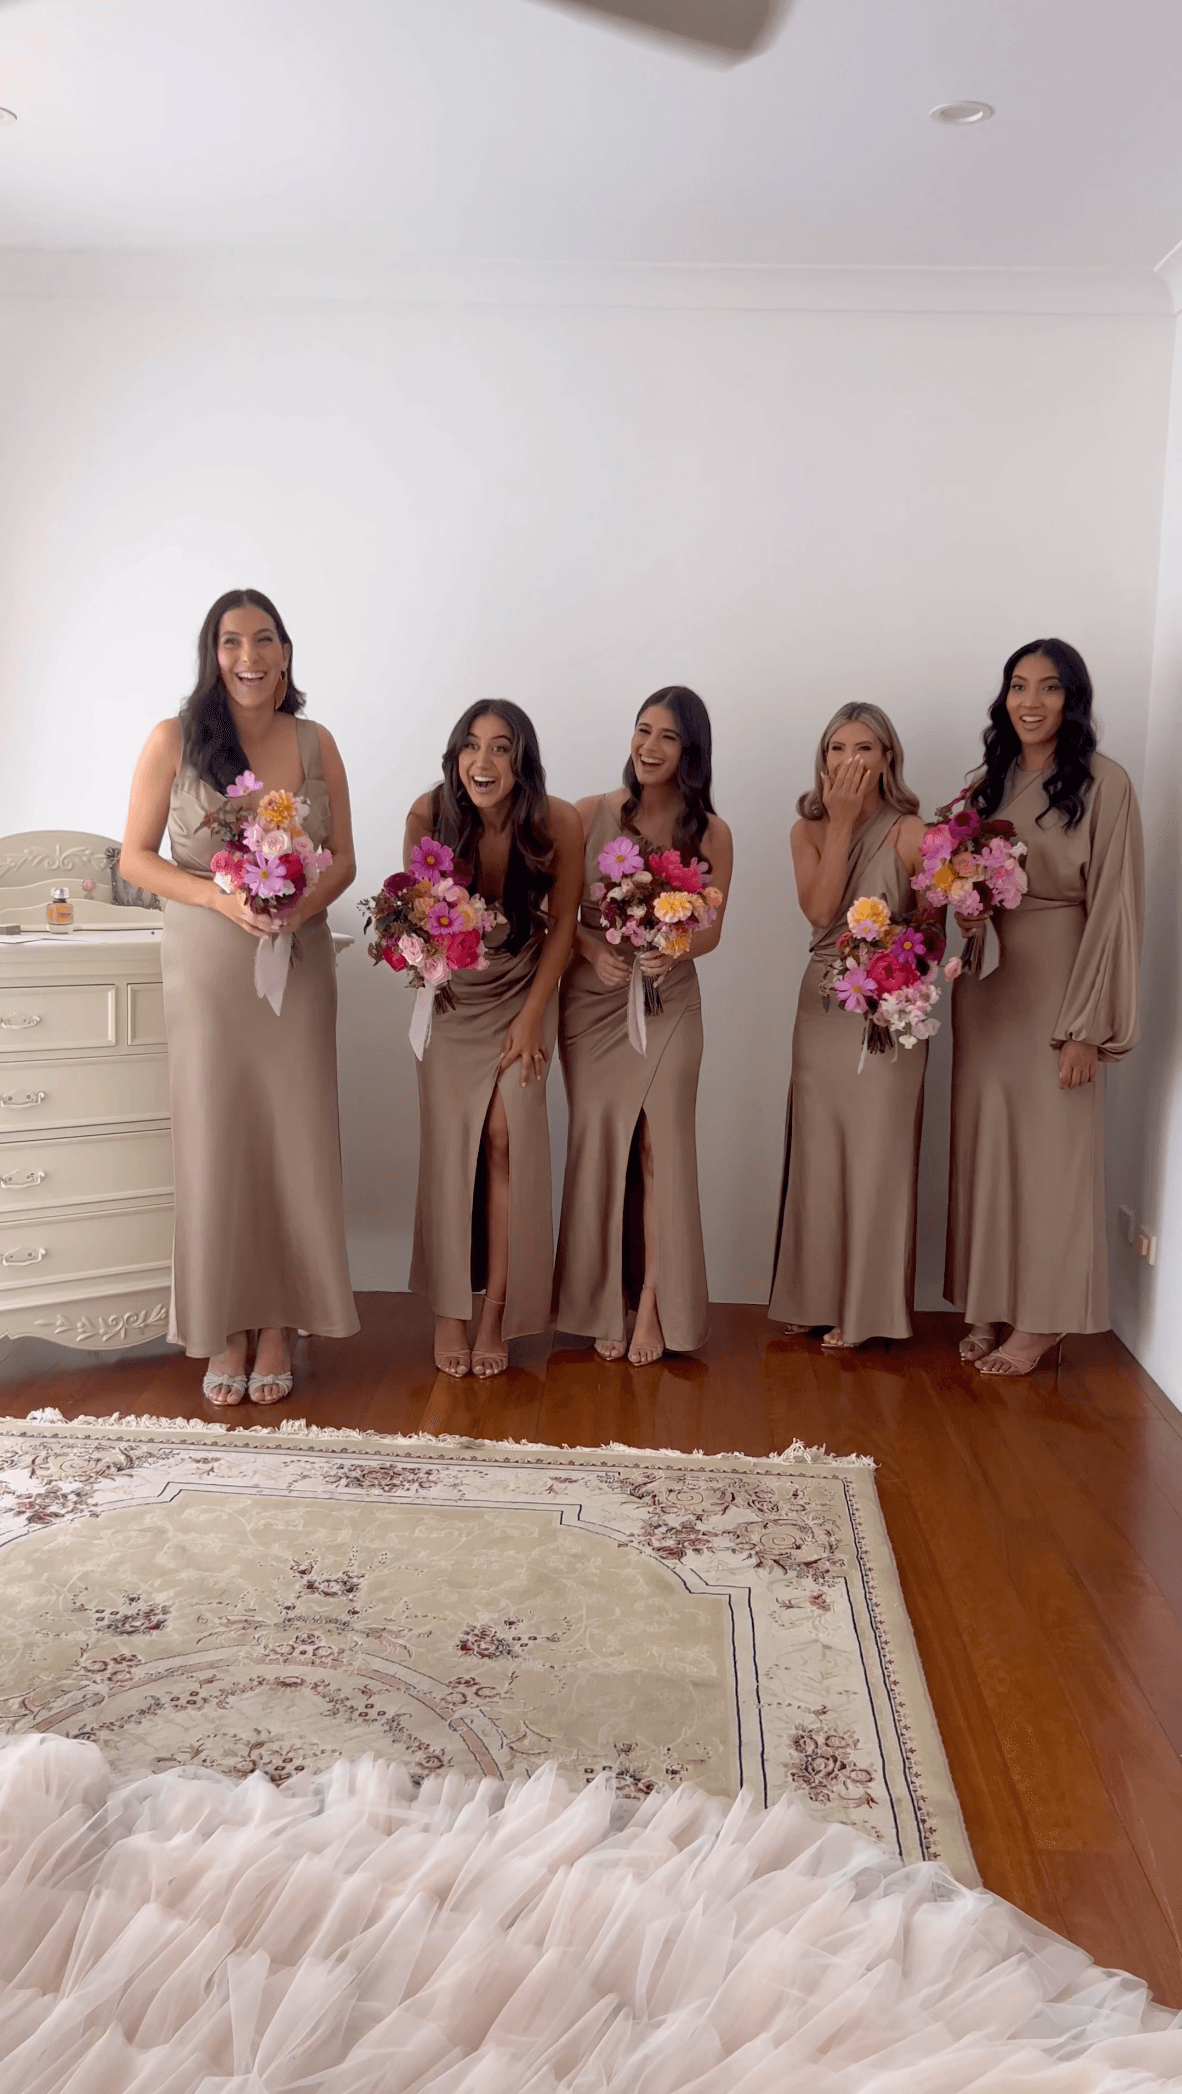 Bride Surprises Bridesmaids With a Handmade Wedding Dress That Took Her ...